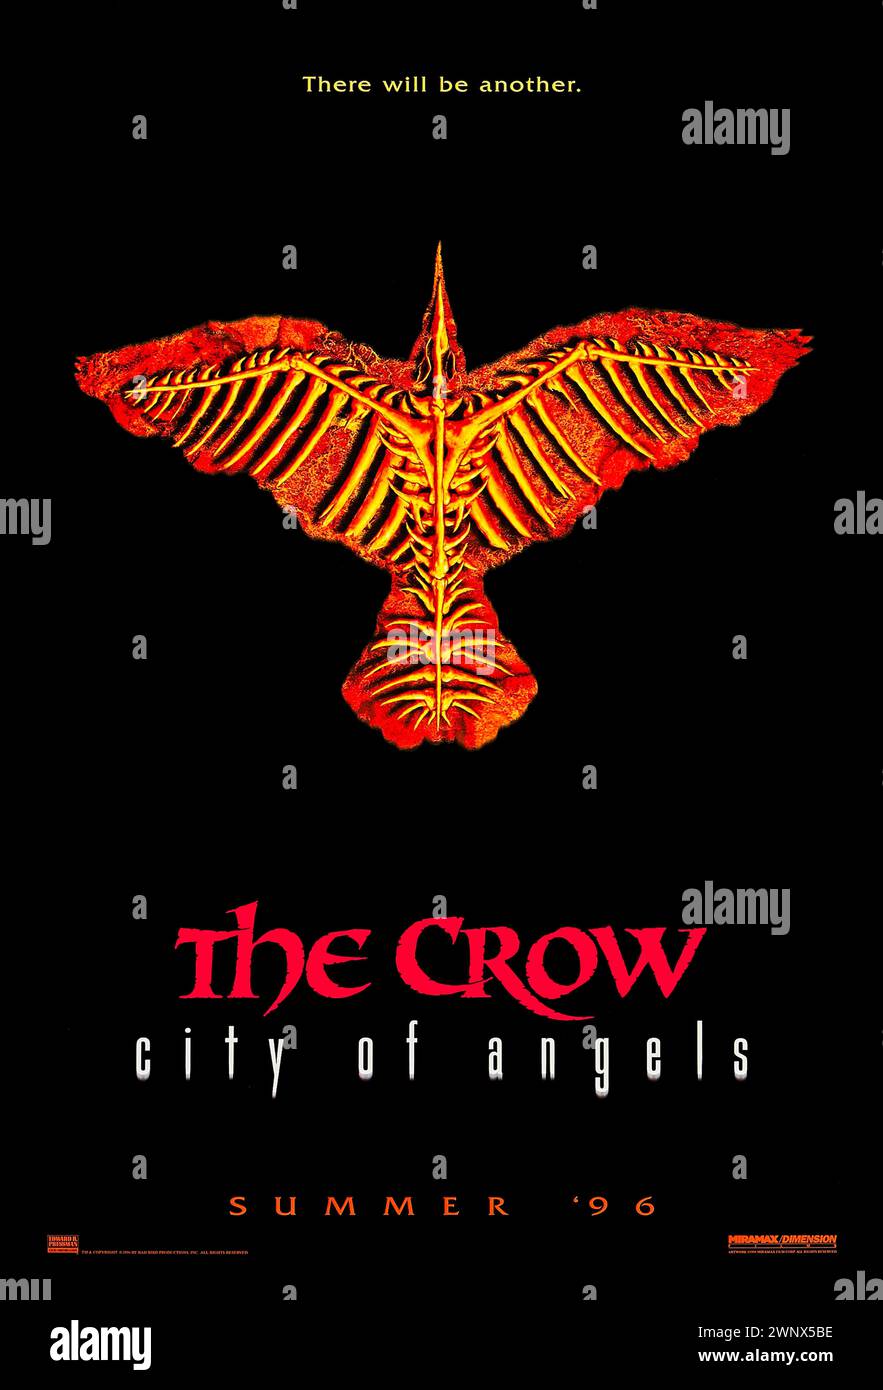 The Crow: City of Angels (1996) directed by Tim Pope and starring Vincent Perez, Mia Kirshner and Richard Brooks. The spirit of the Crow resurrects another man seeking revenge for the murder of his son. Photograph of an original 1996 US advance poster. ***EDITORIAL USE ONLY*** Credit: BFA / Miramax Films Stock Photo